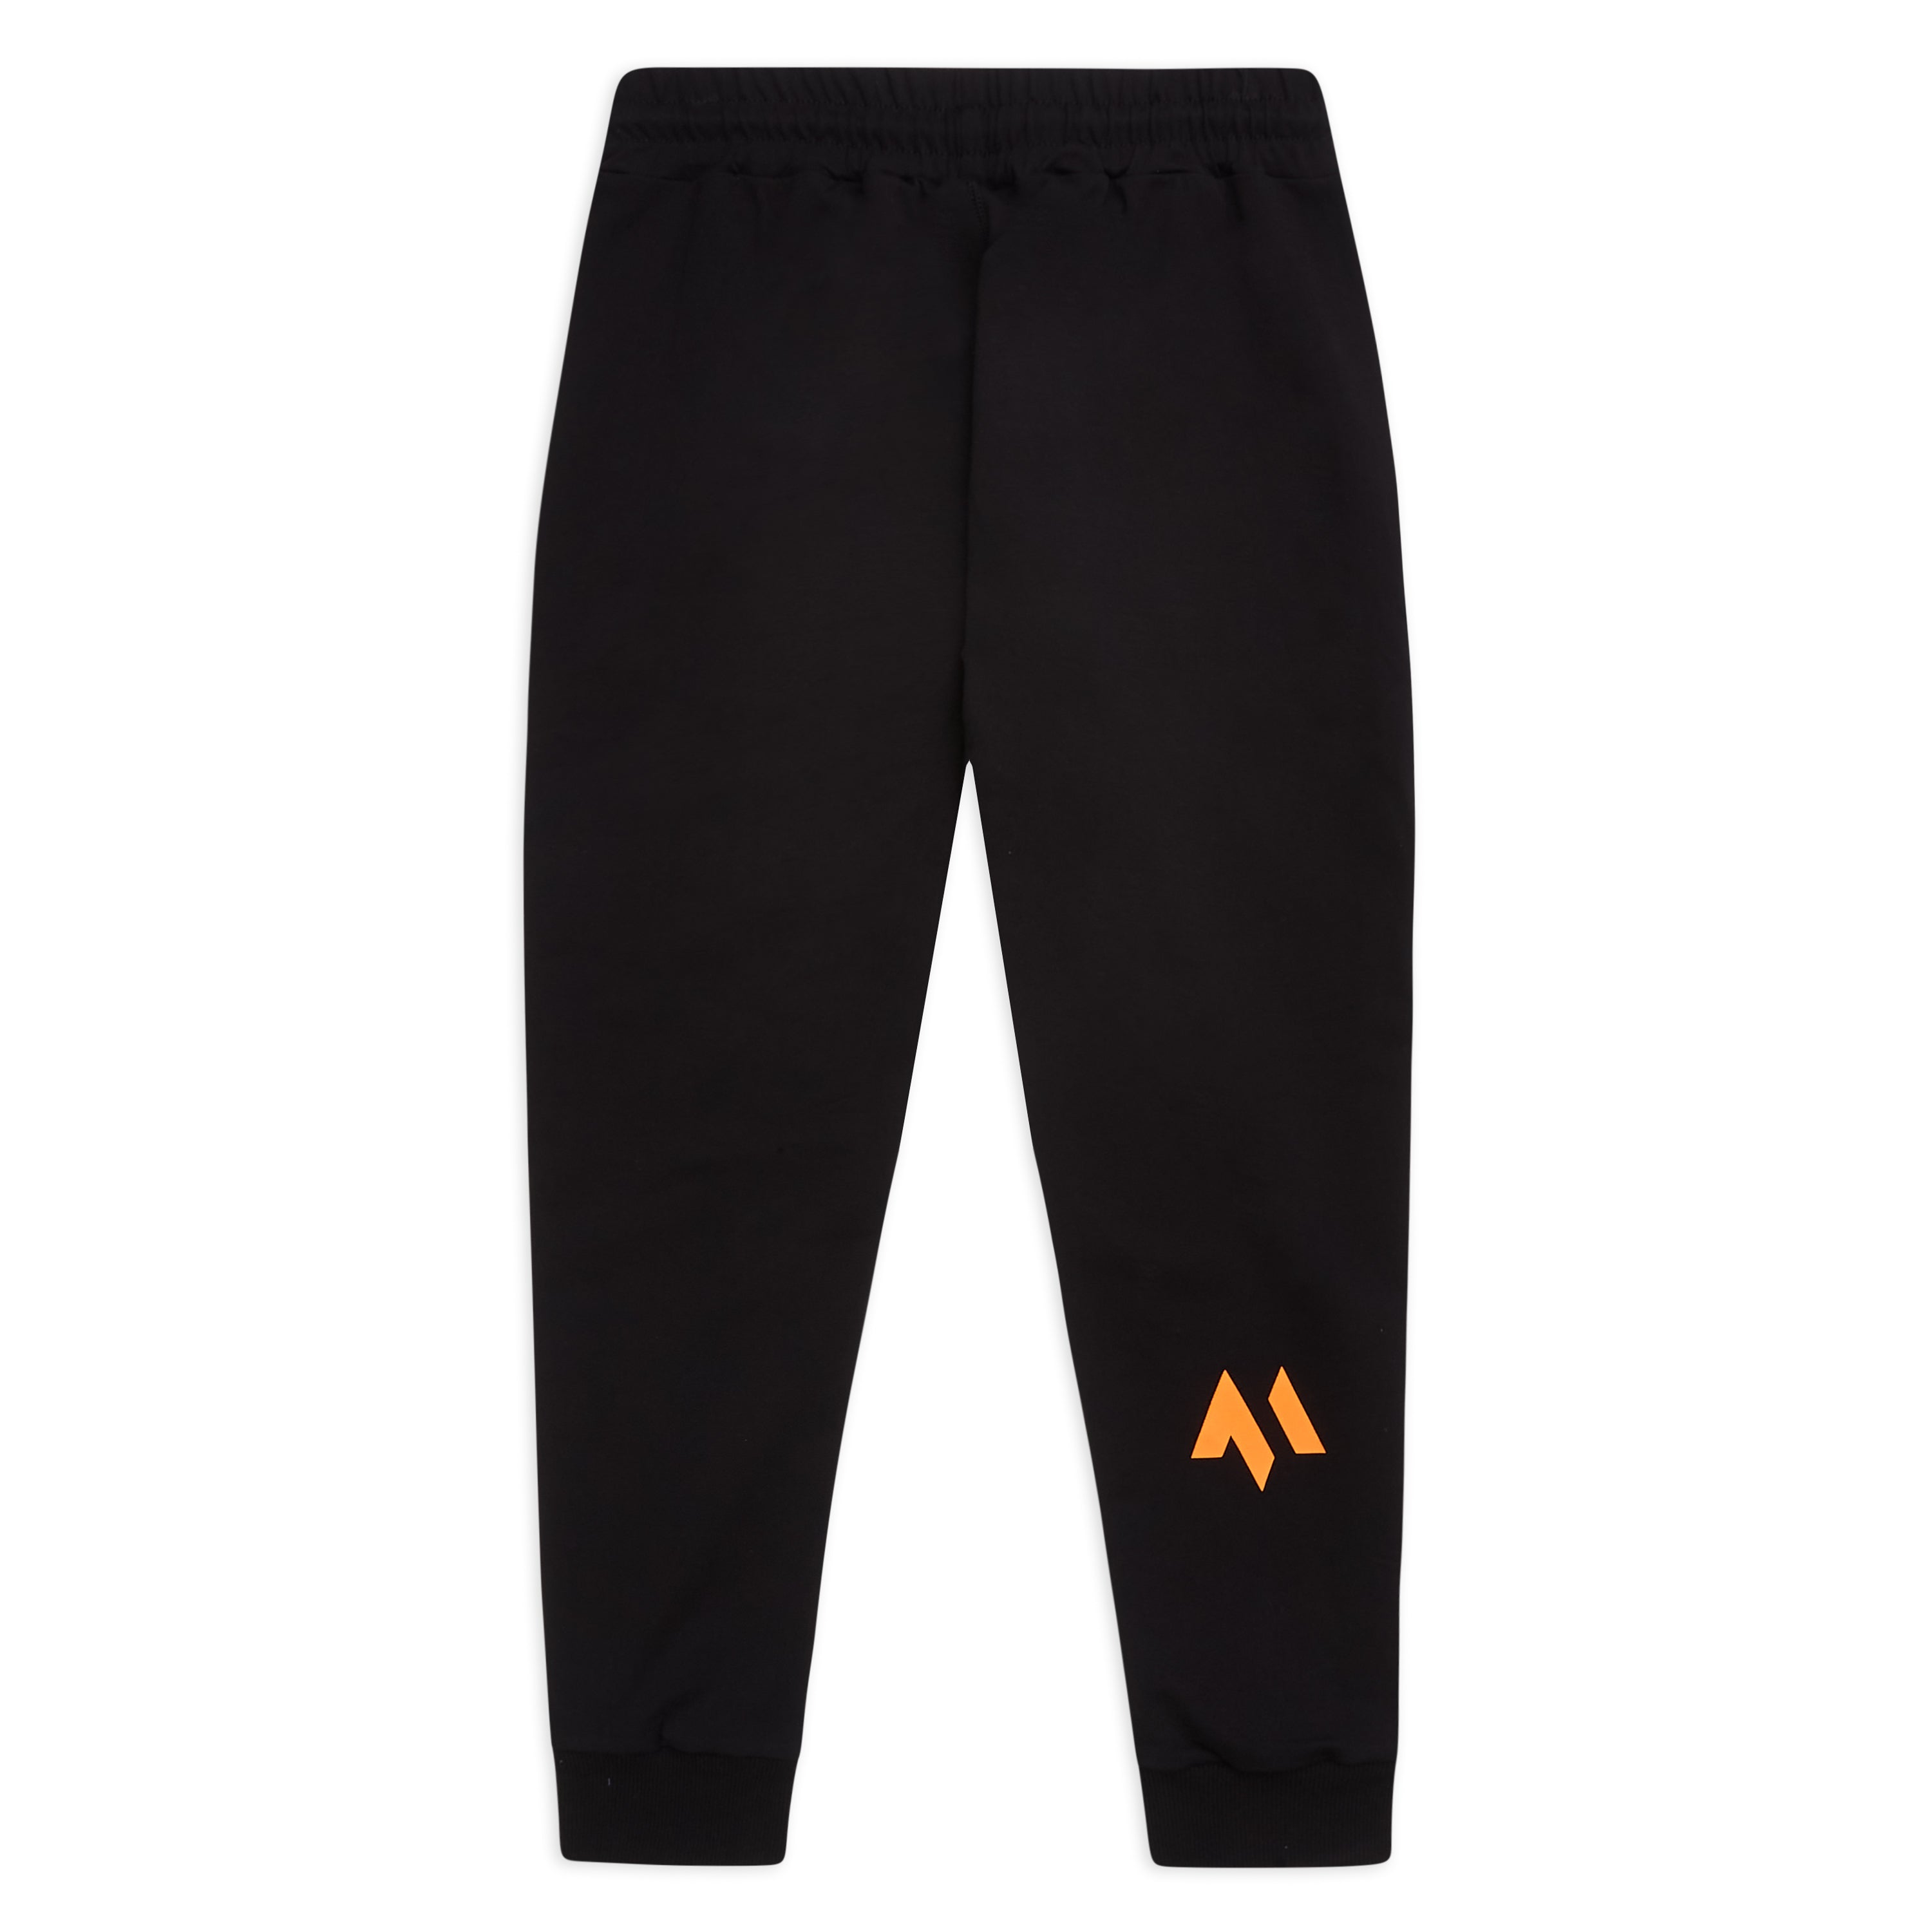 This is a product image of the new standard joggers in black on a white background showing the rear of the product with the orange M emblem on the calf of the right leg